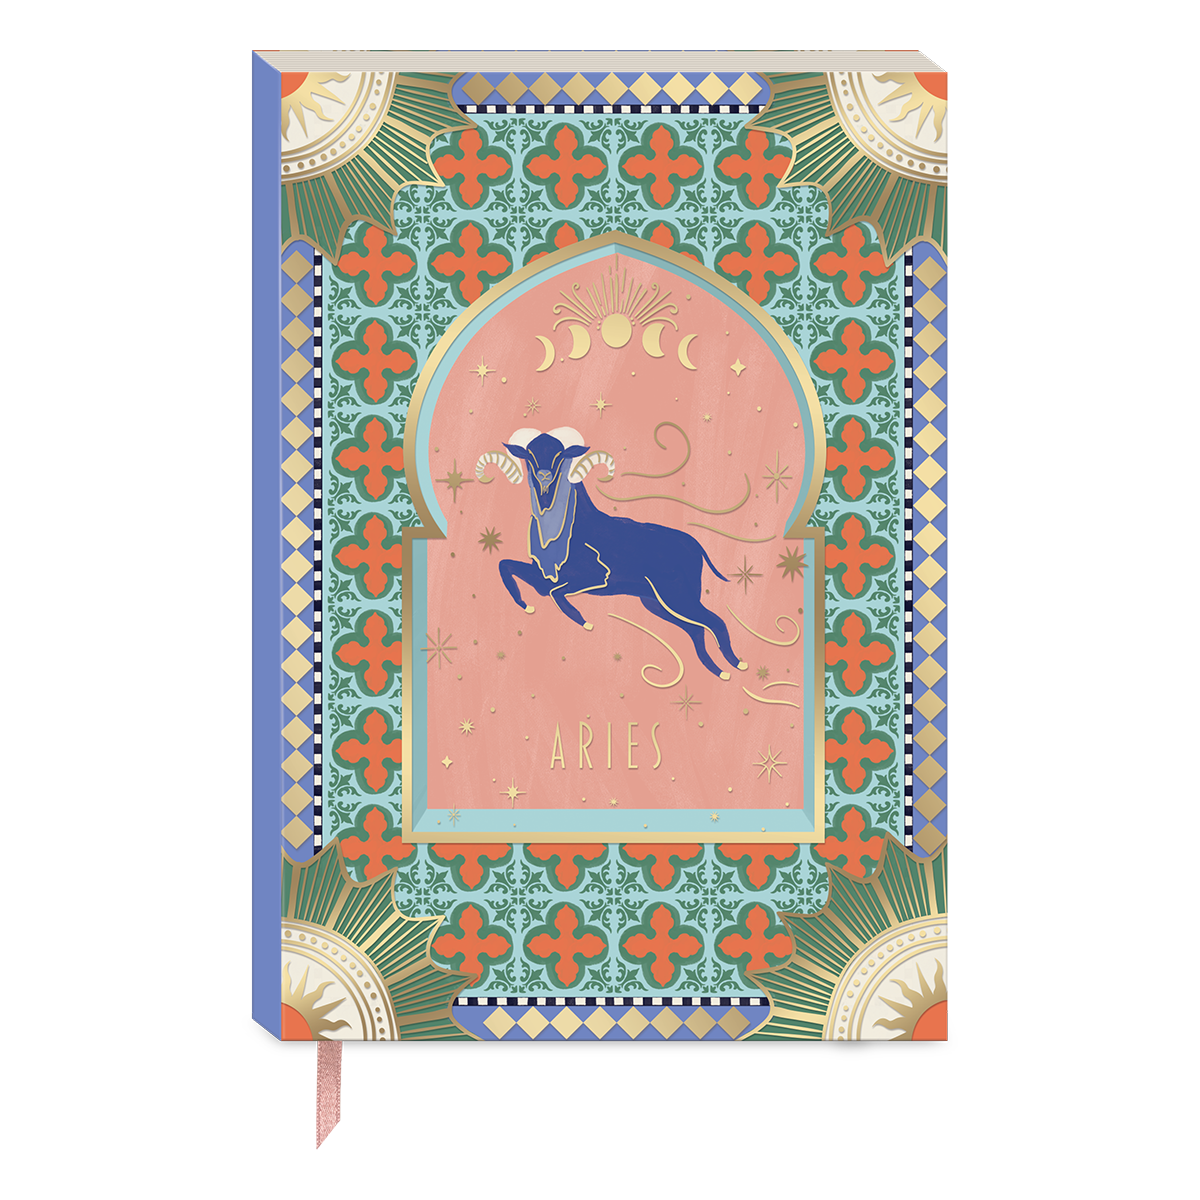 Zodiac Aries Softcover Journal Product